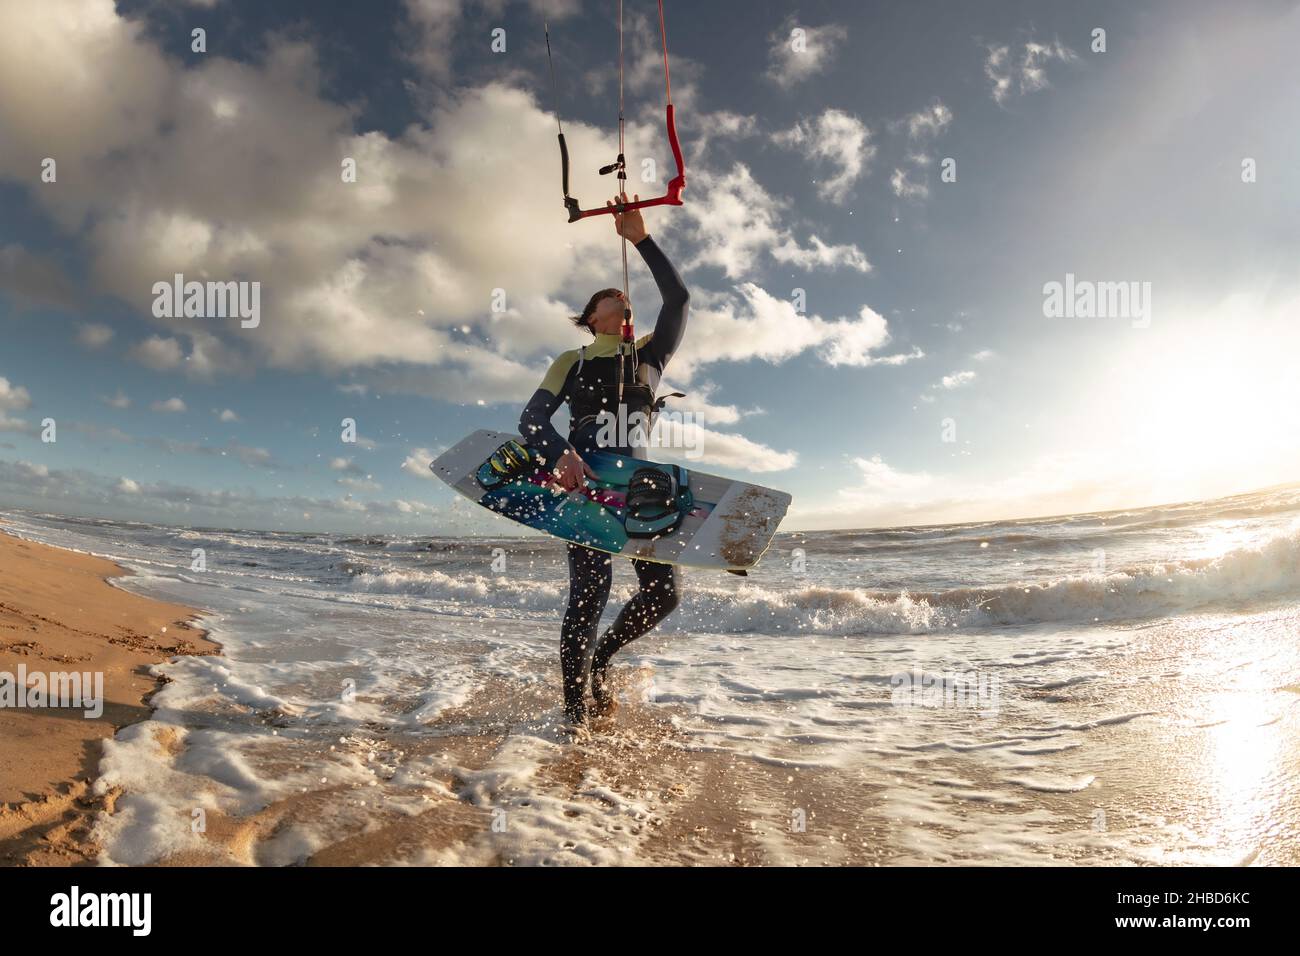 Kite surfer in black wetsuit stands in the water at sea beach with wakeboard and holds kite Stock Photo